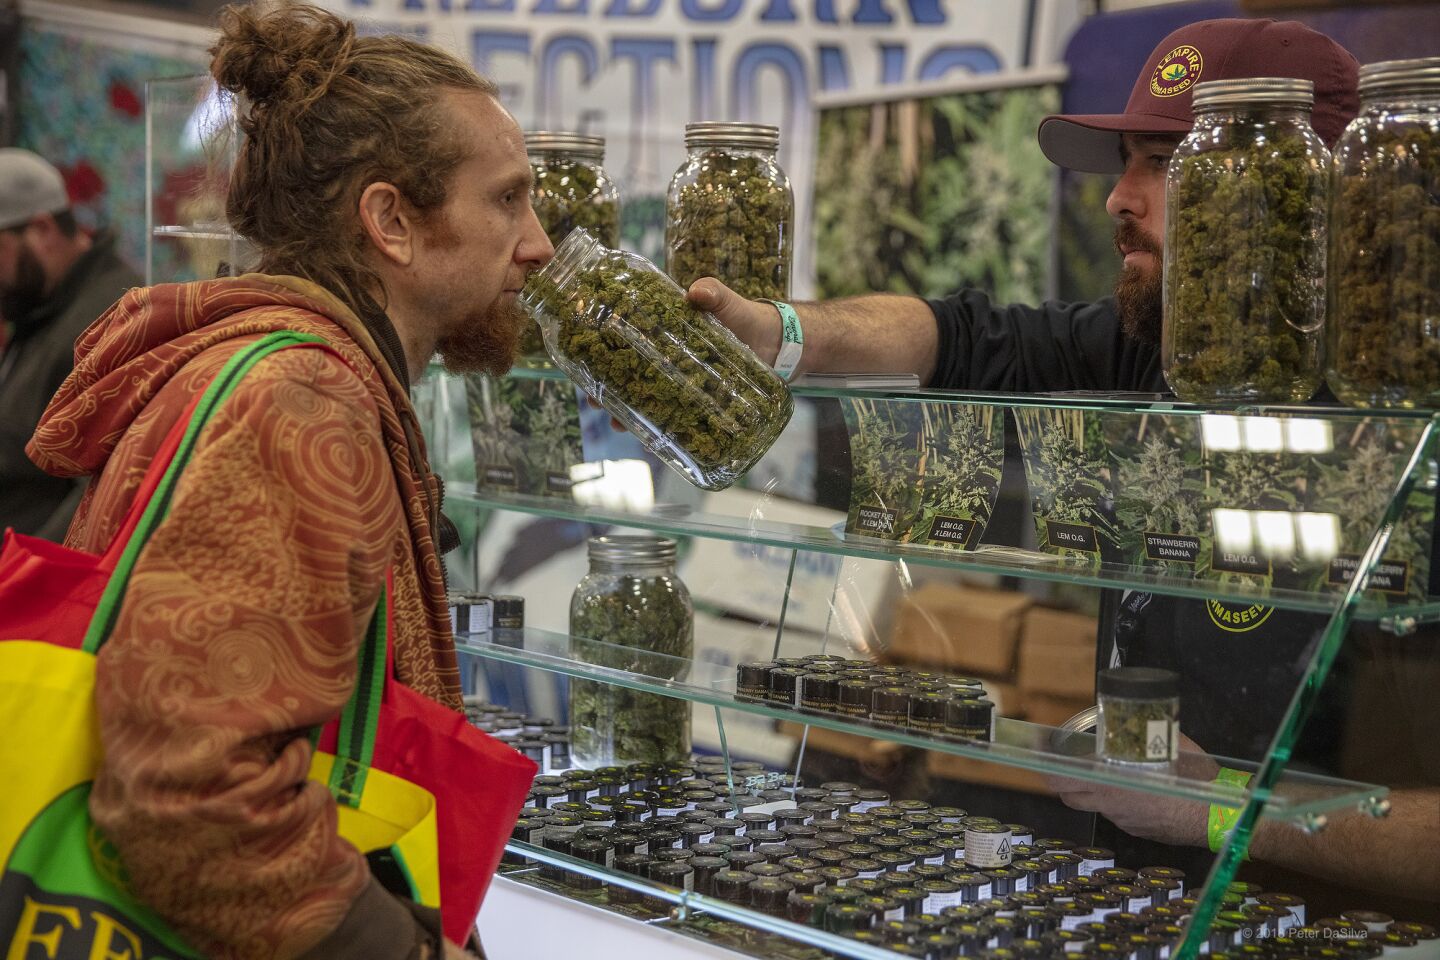 The sniff test at the Emerald Cup